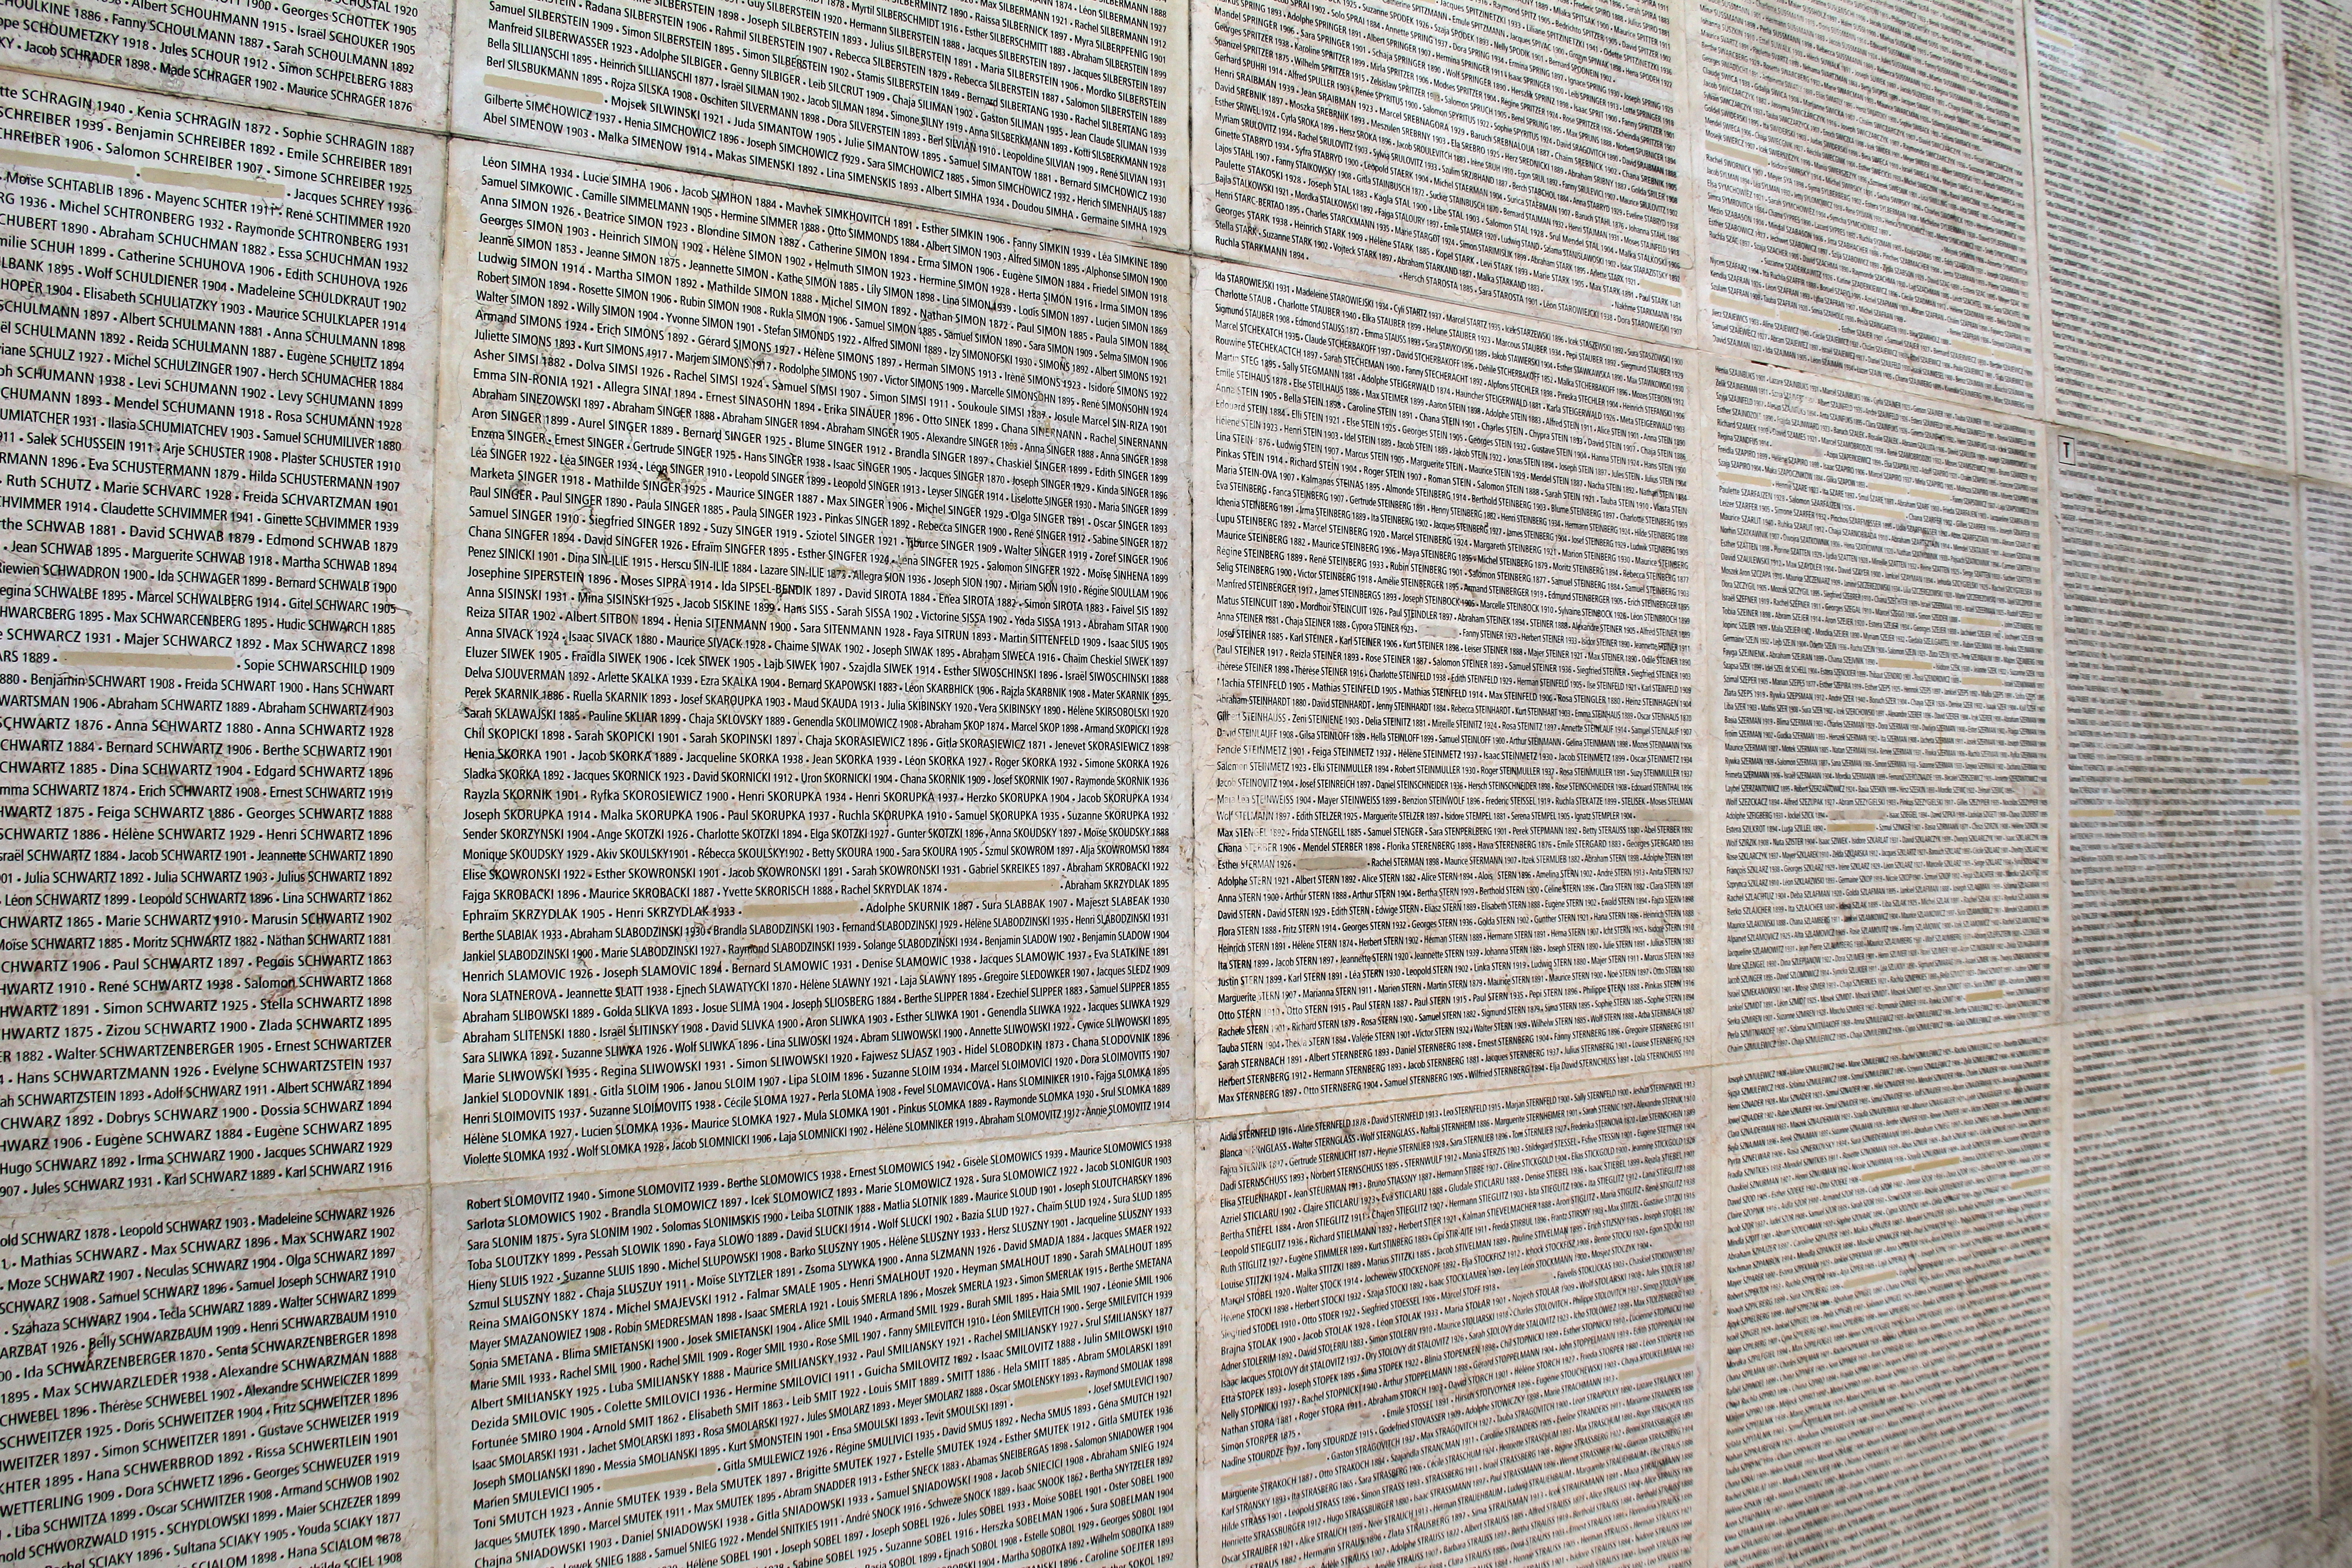 Names - There are Thousands - Holocaust Memorial